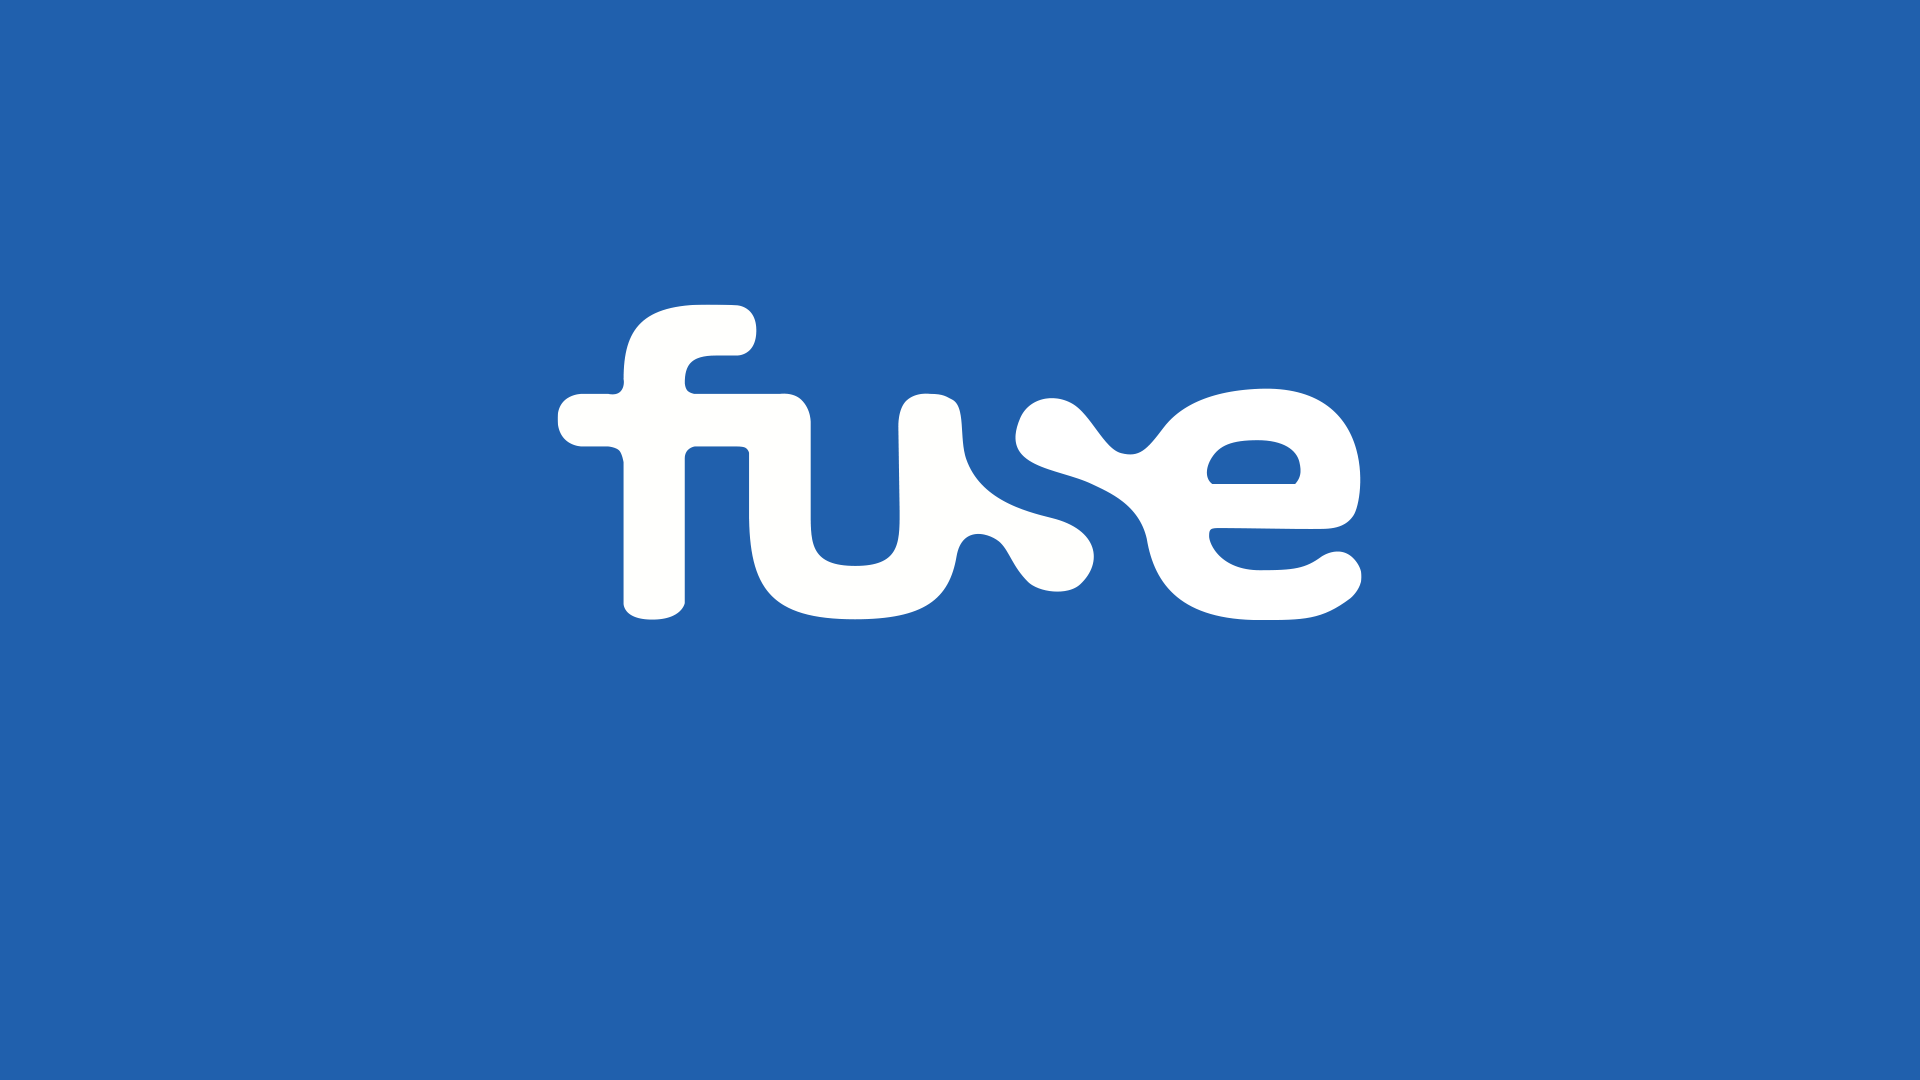 A white Fuse logo against a blue background